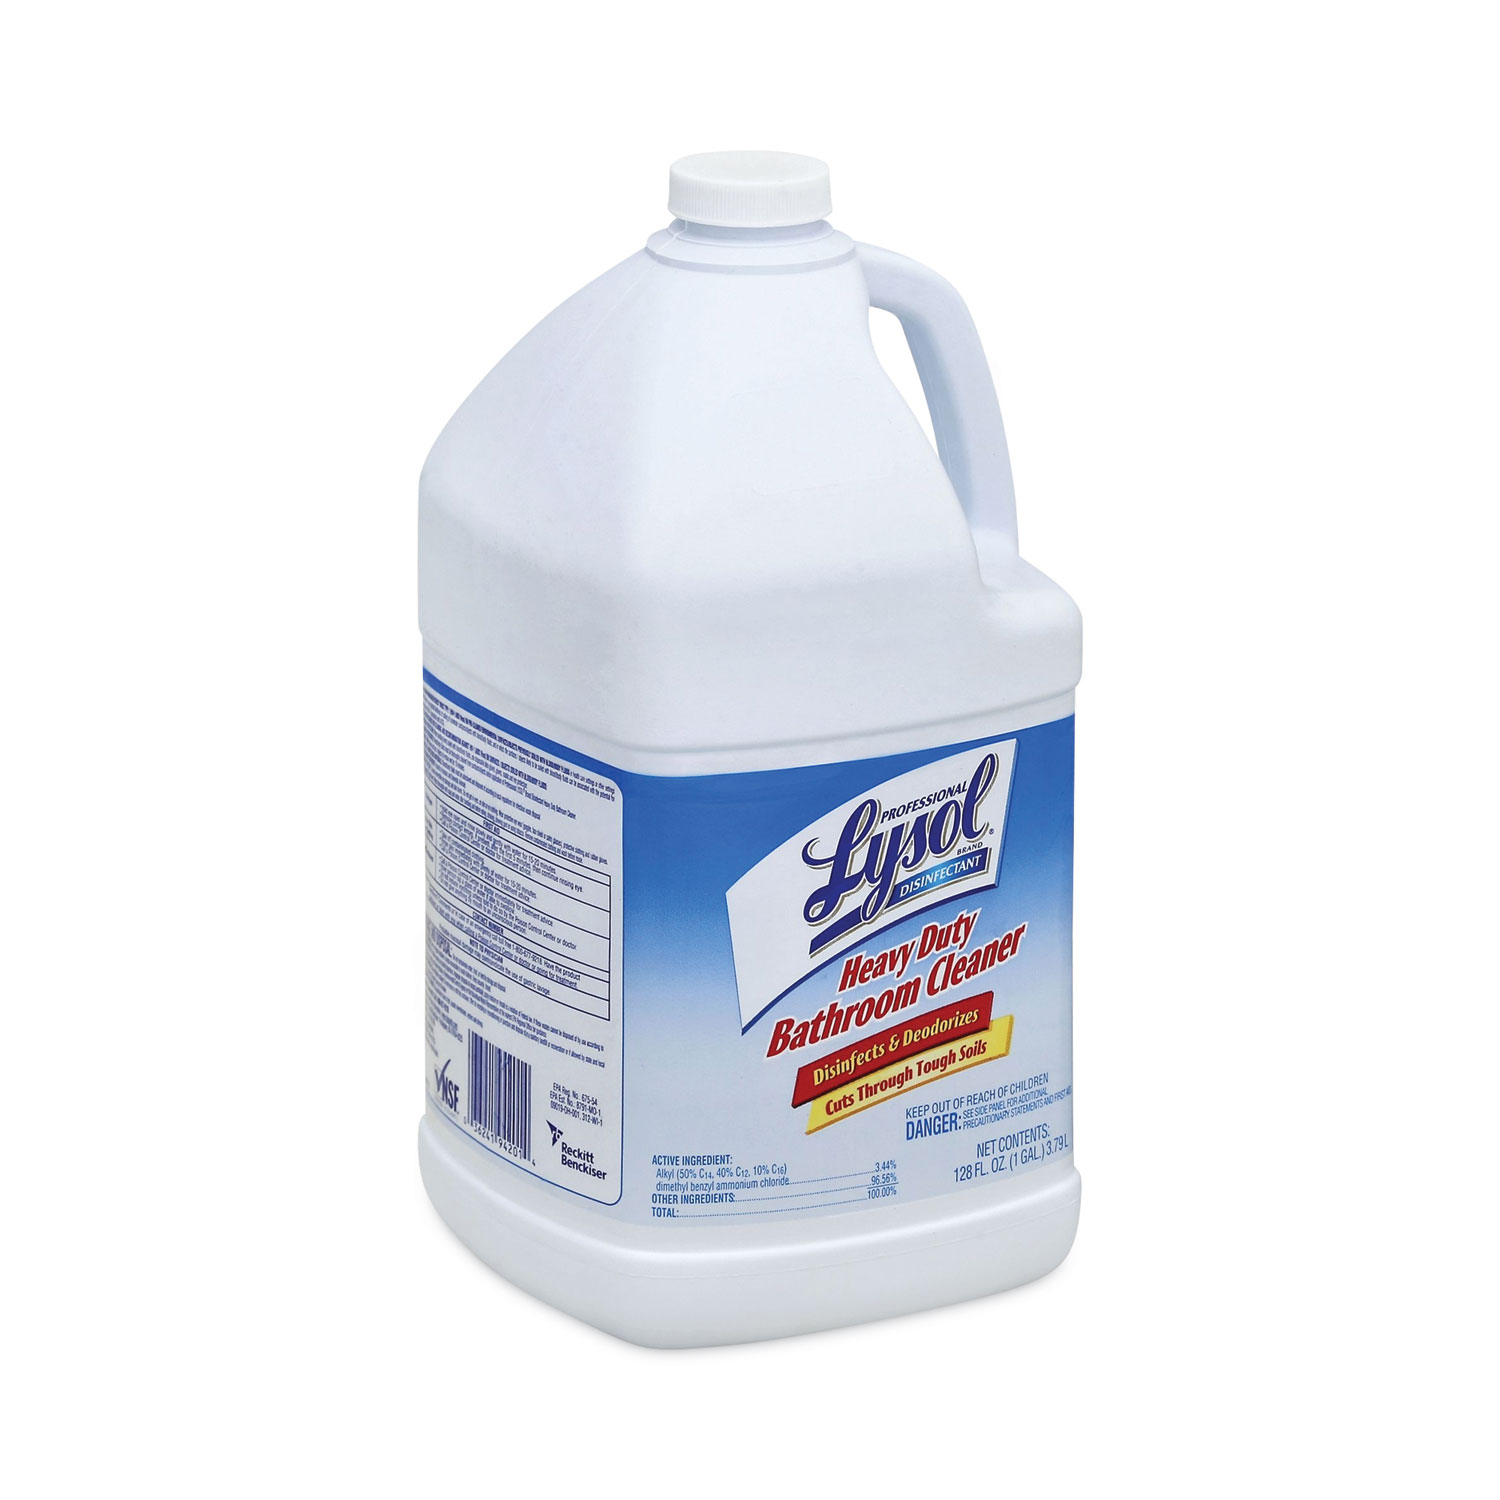 Disinfectant Heavy-Duty Bathroom Cleaner Concentrate, 1 gal Bottle